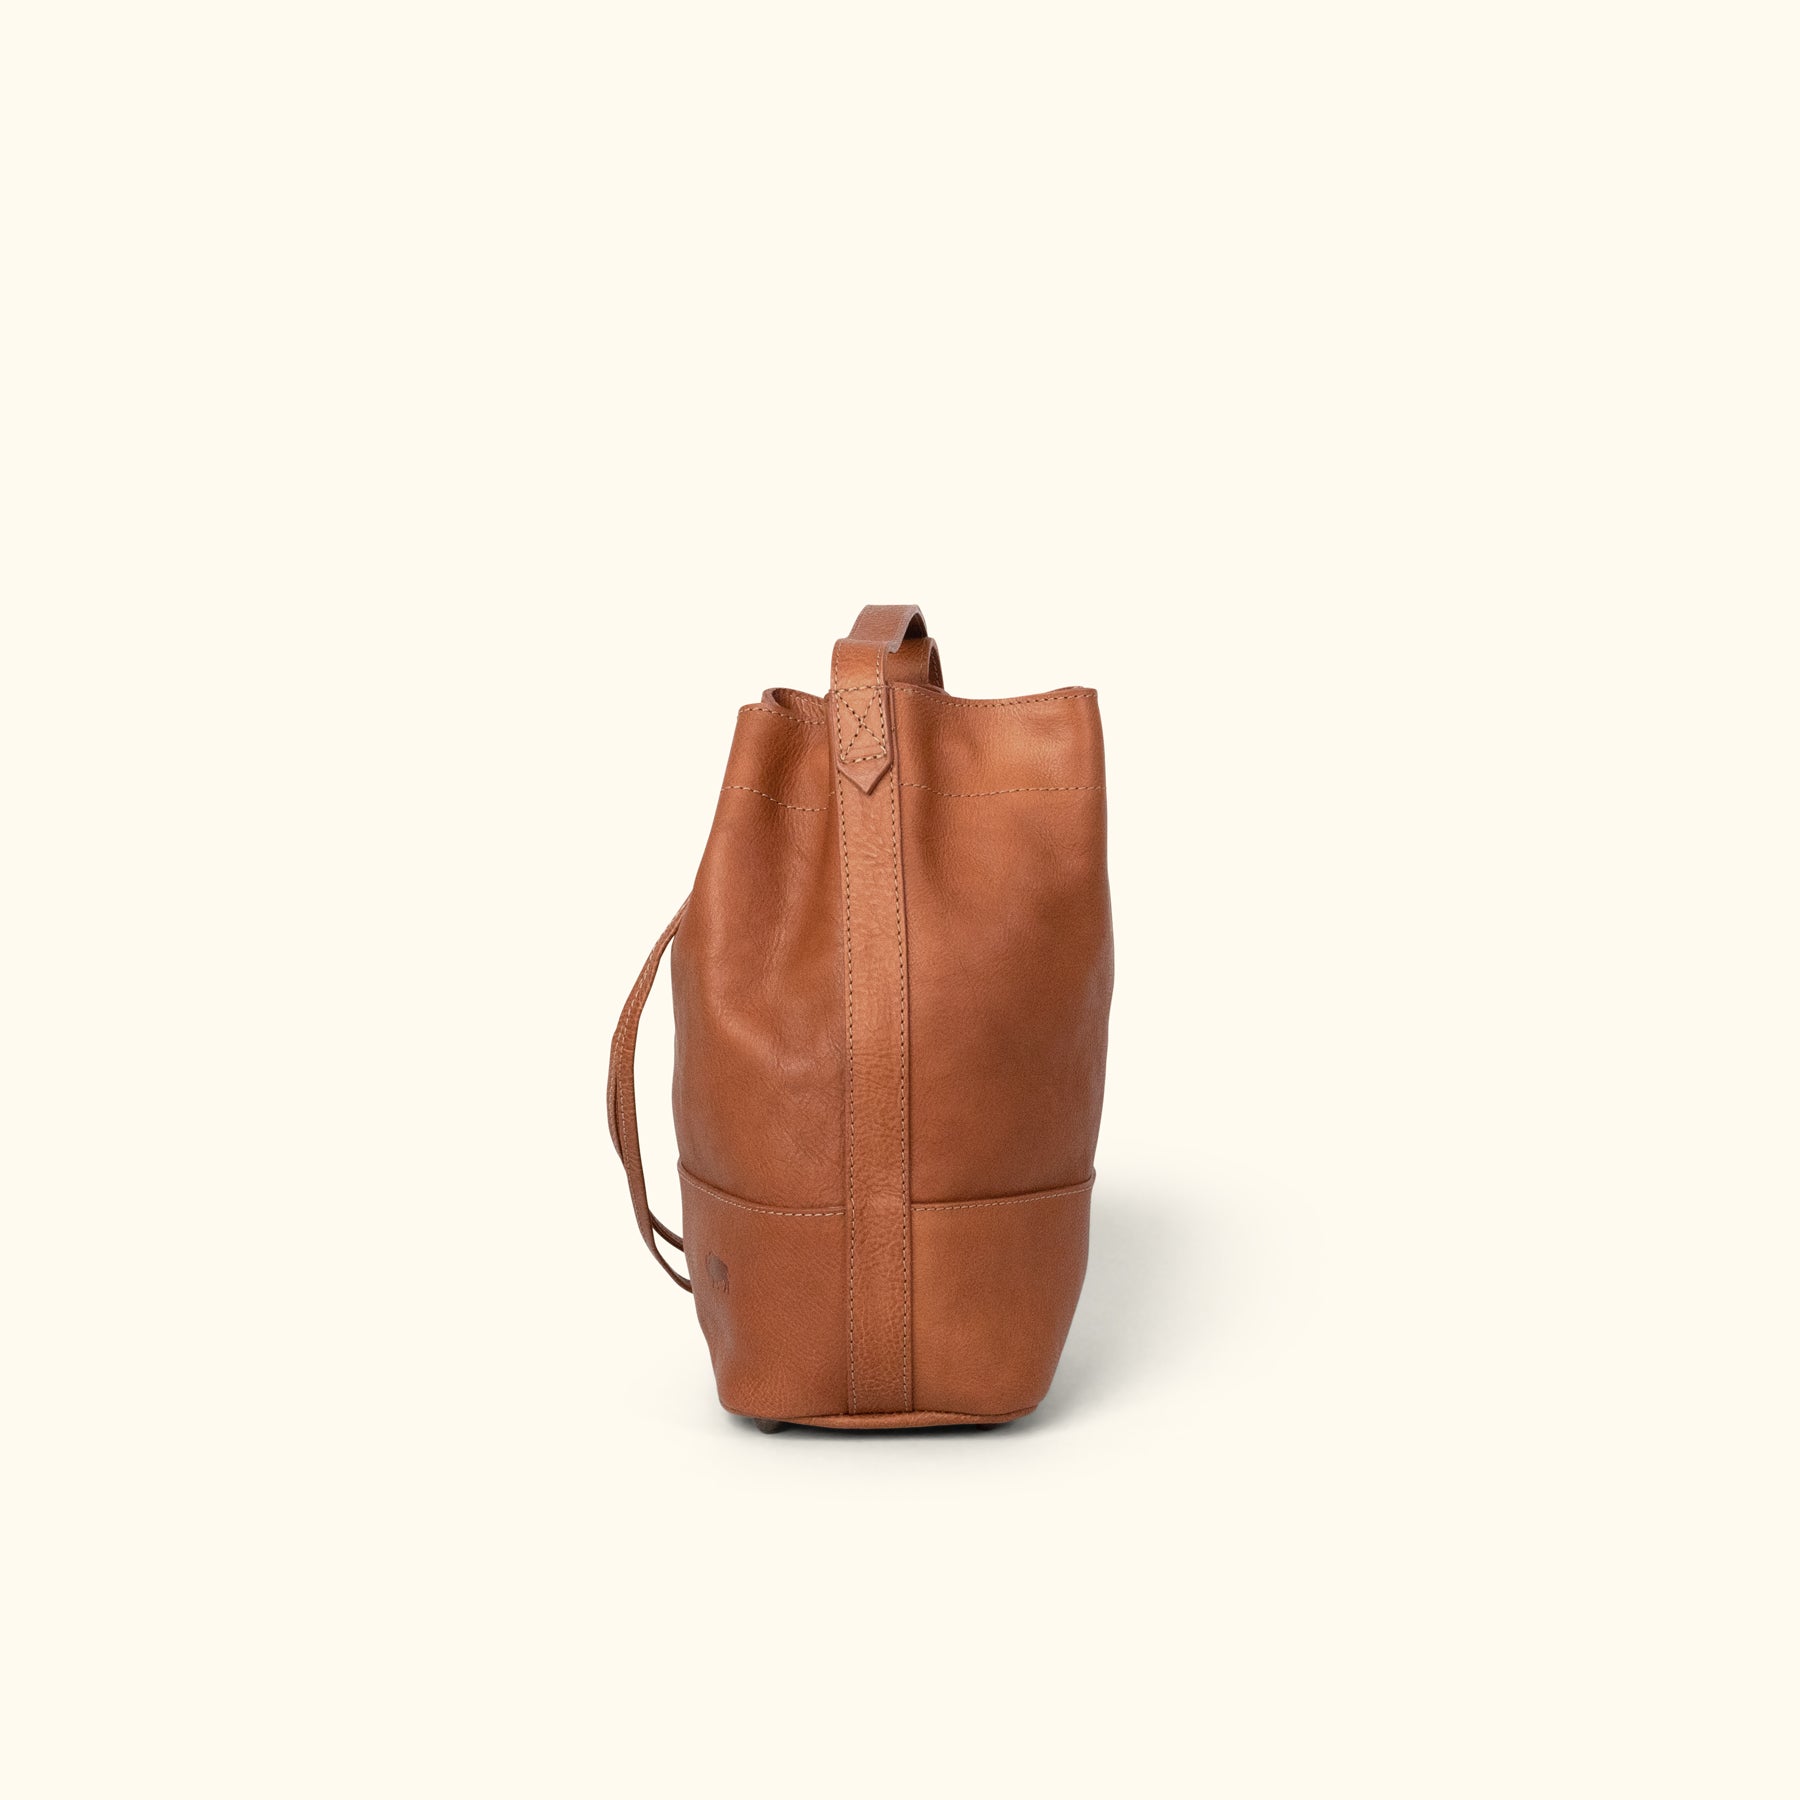 Leather Bucket Bag, Taupe Medium Song Bag